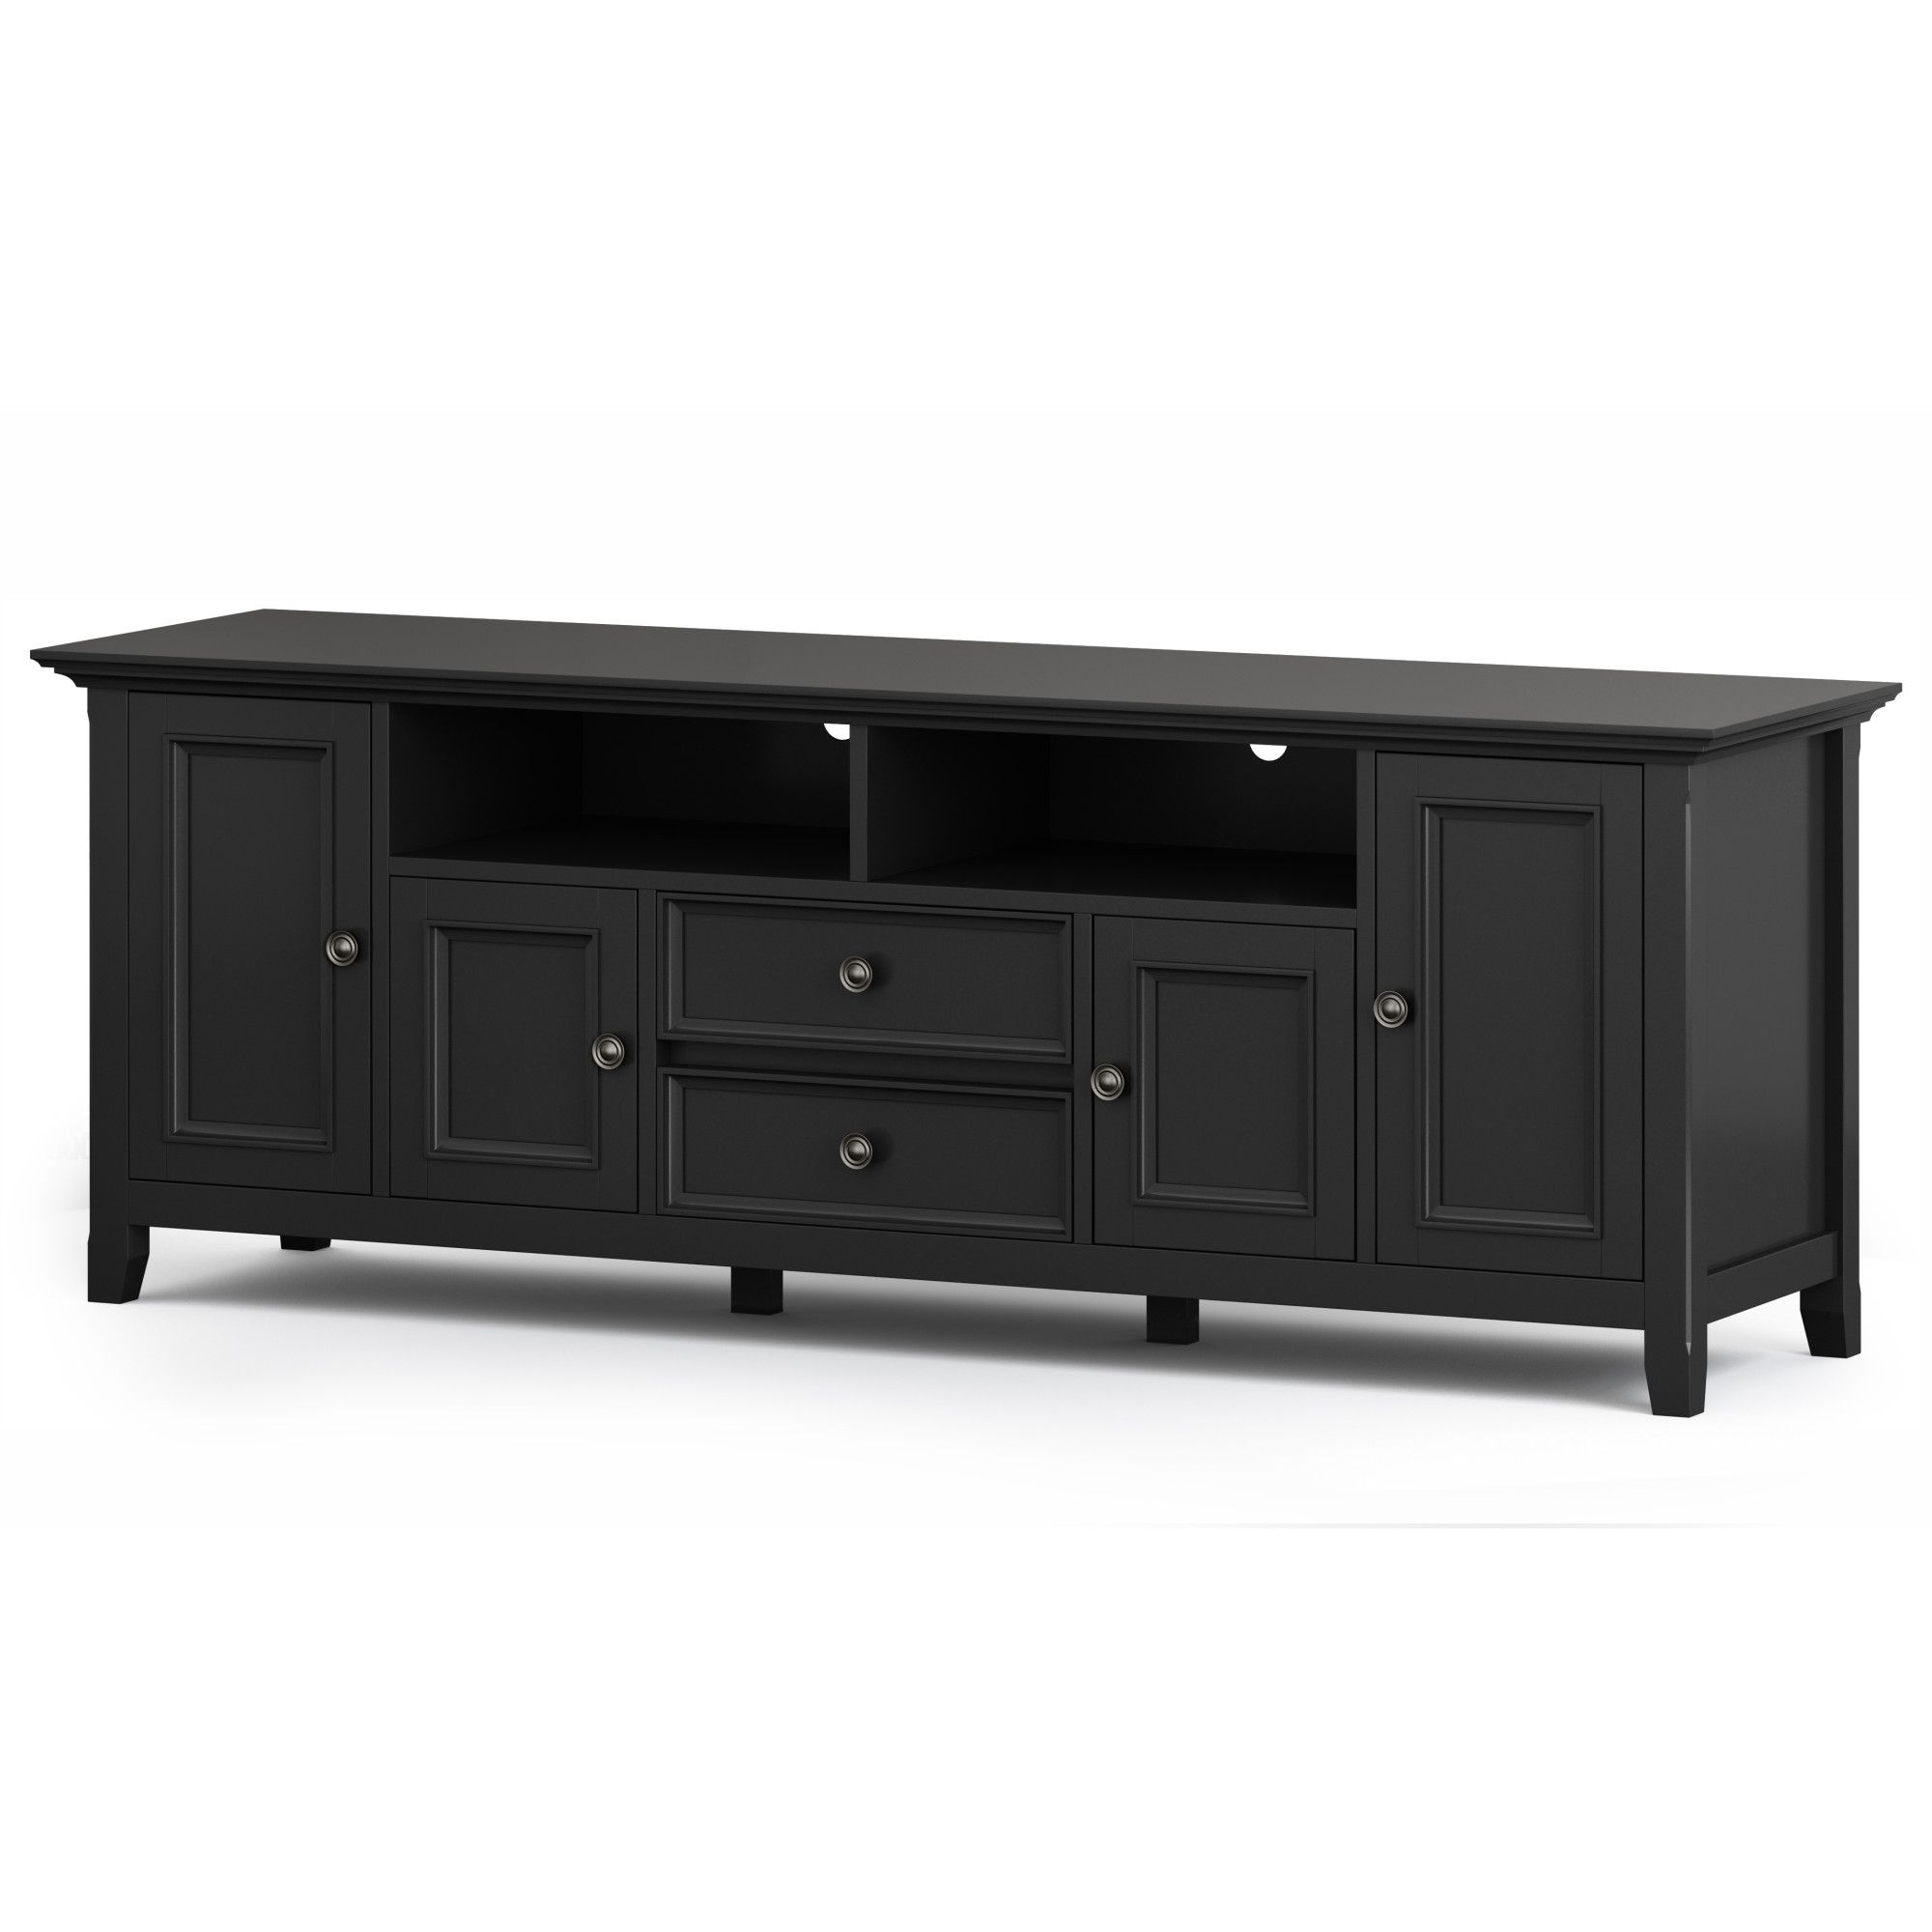 Brooklyn + Max Washington Solid Wood 72 Inch Wide Intended For Bromley Black Wide Tv Stands (View 12 of 15)